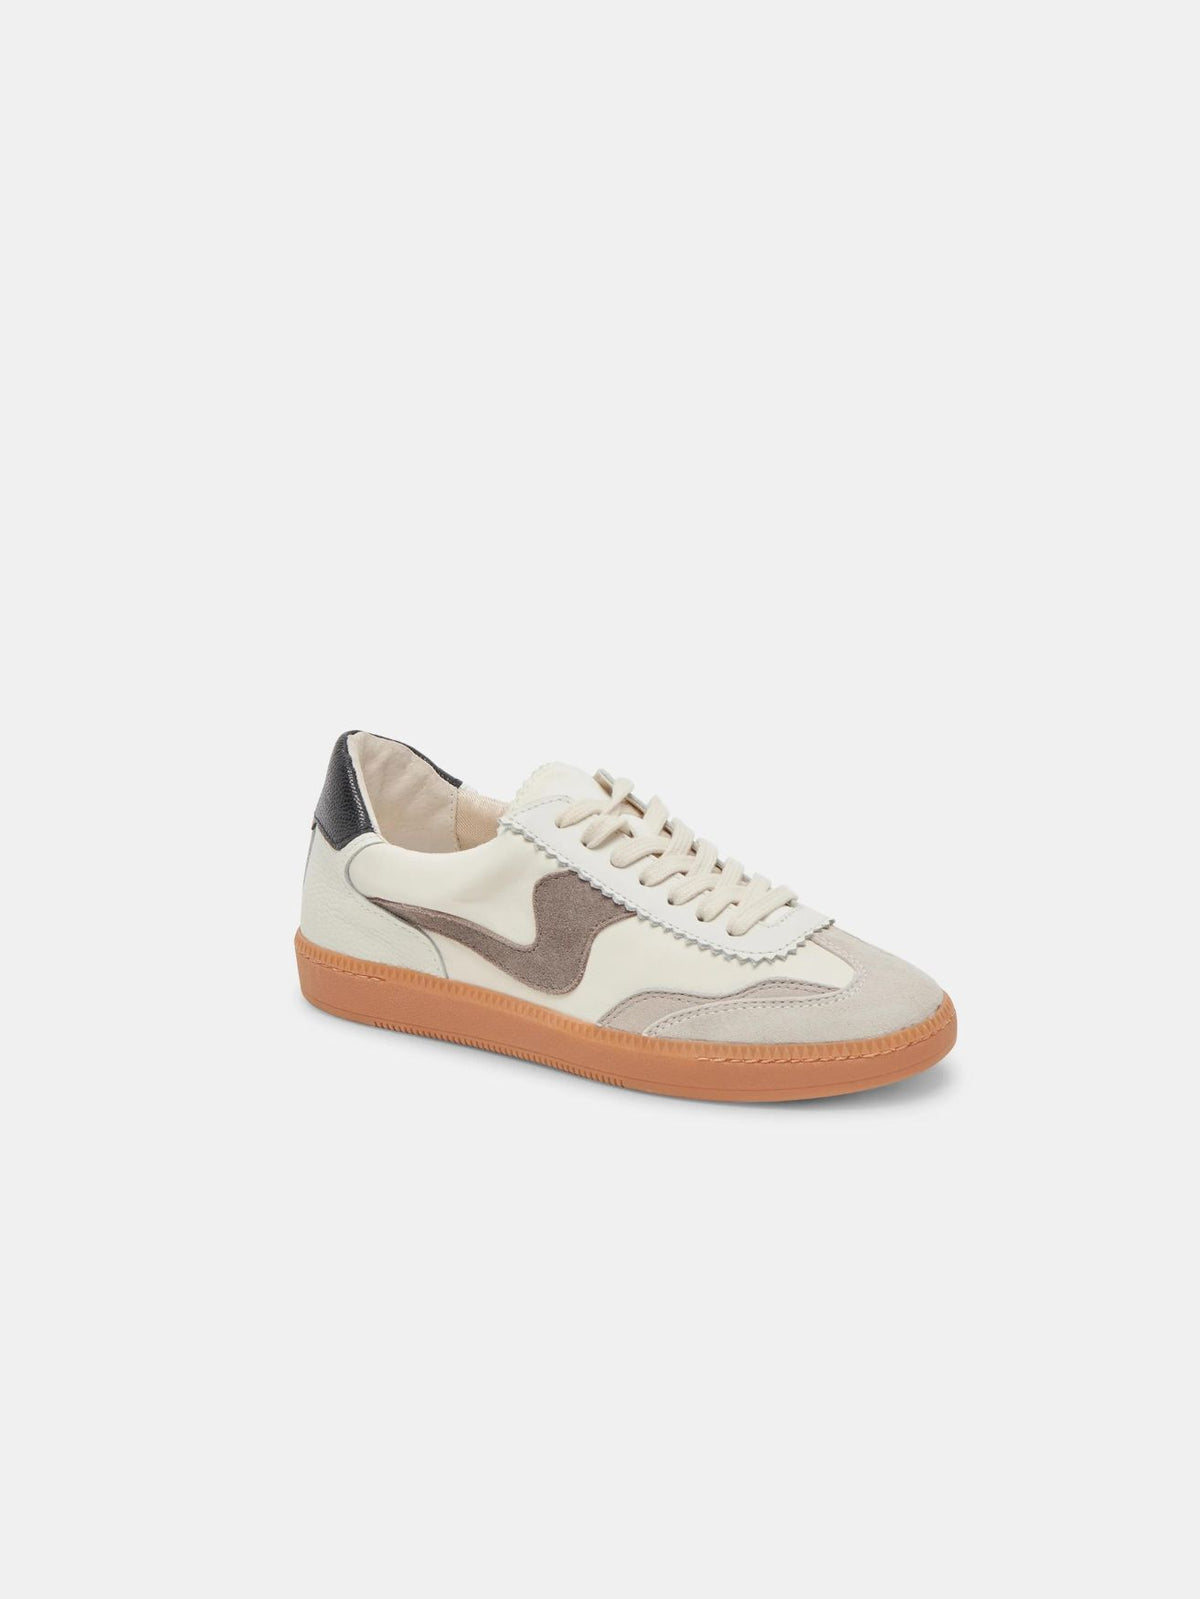 dolce vita notice sneakers in white and grey leather-angled view